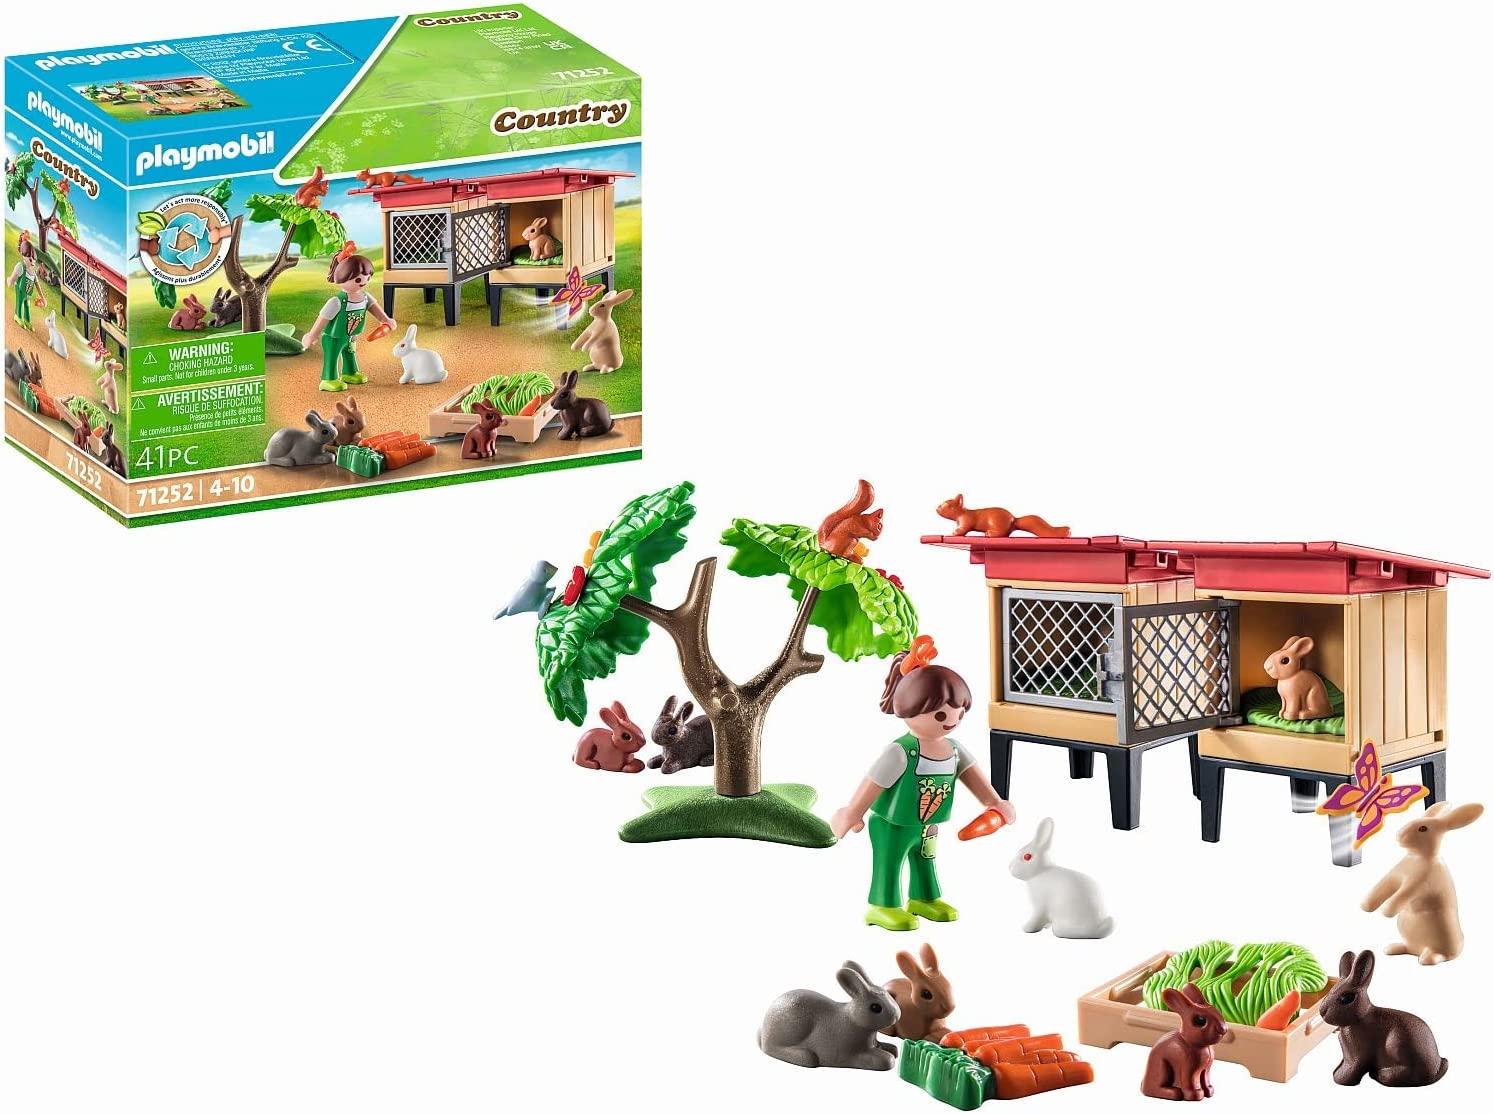 Playmobil 71252 - Country: Kaninchenstall